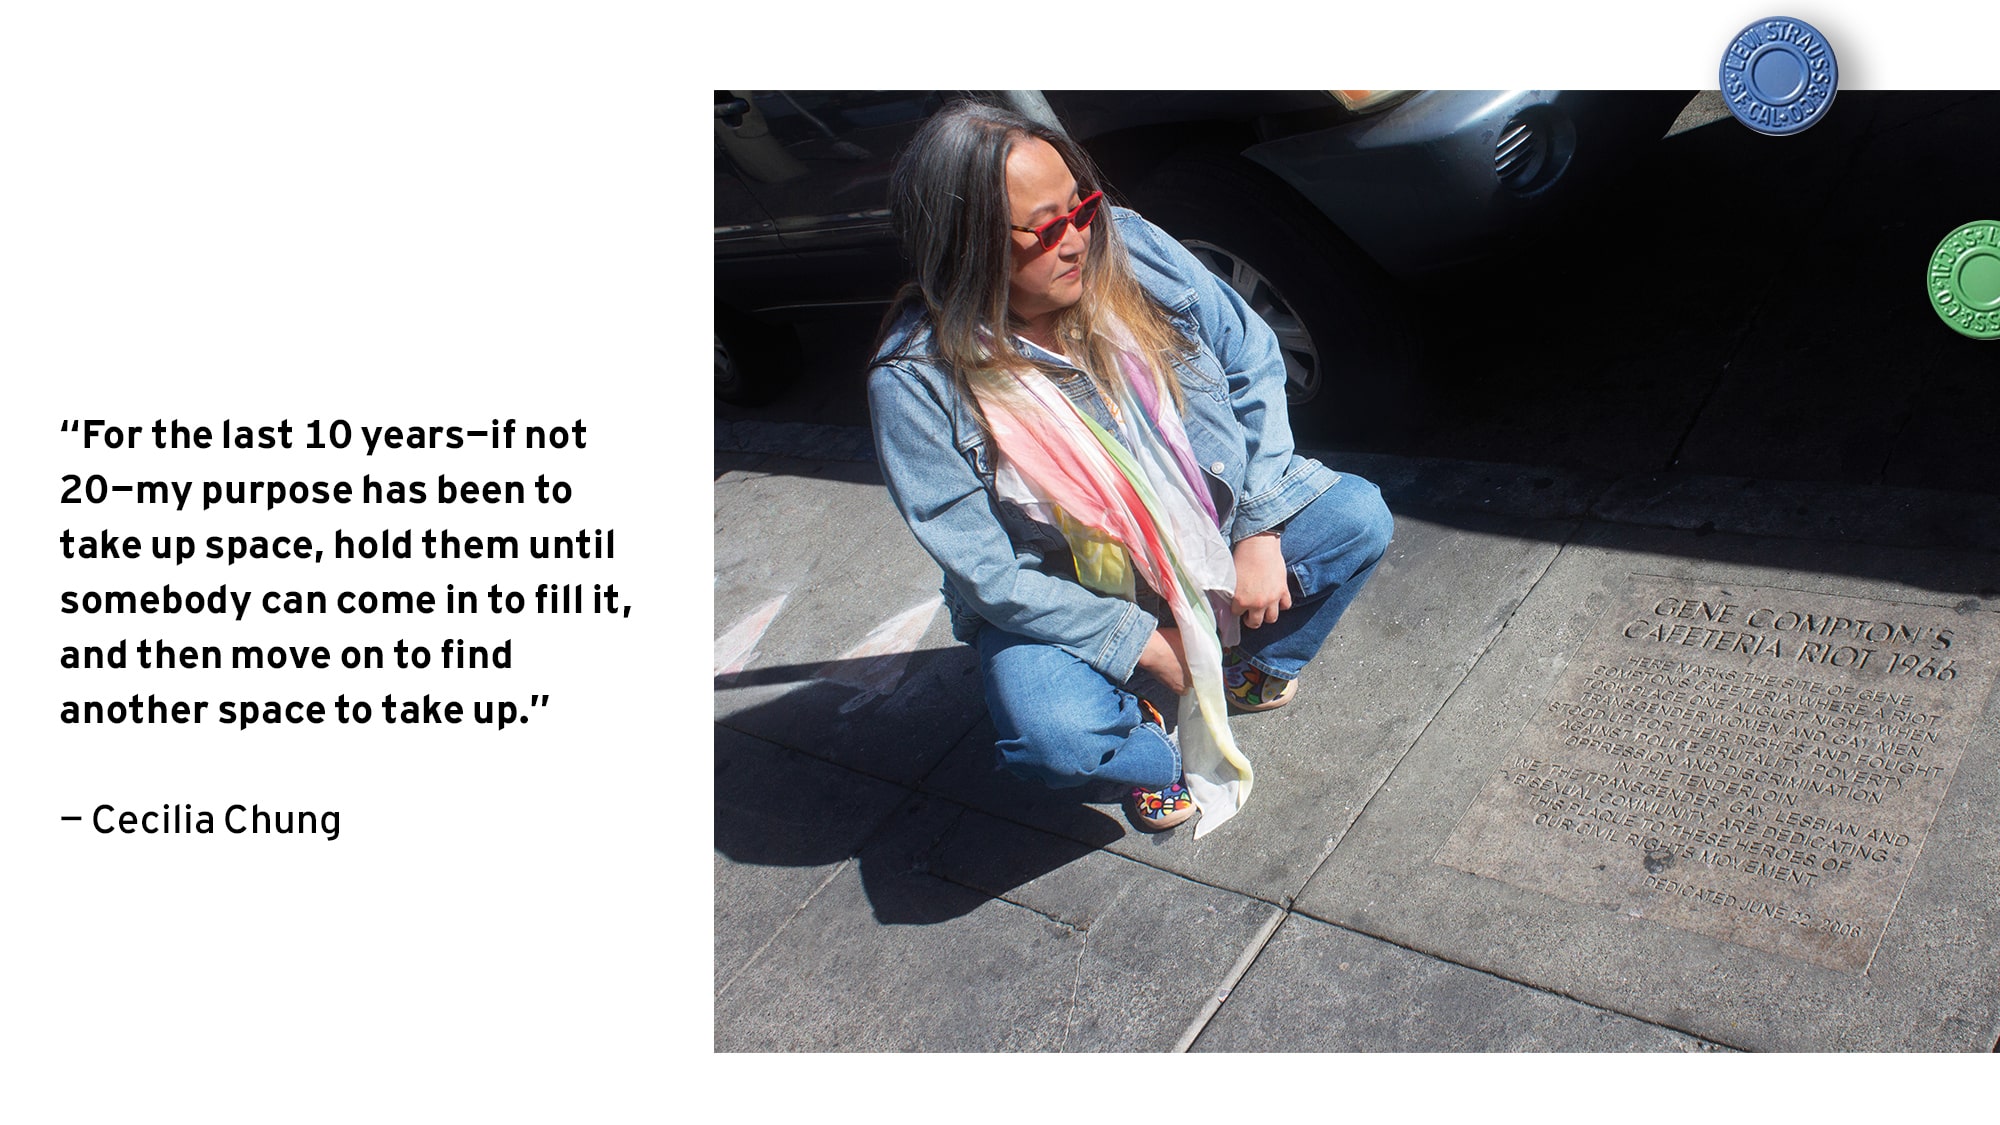 Cecilia Chung Styled in Levi's Pride Denim Jacket and Jeans Squating at the Street - Levi's Hong Kong